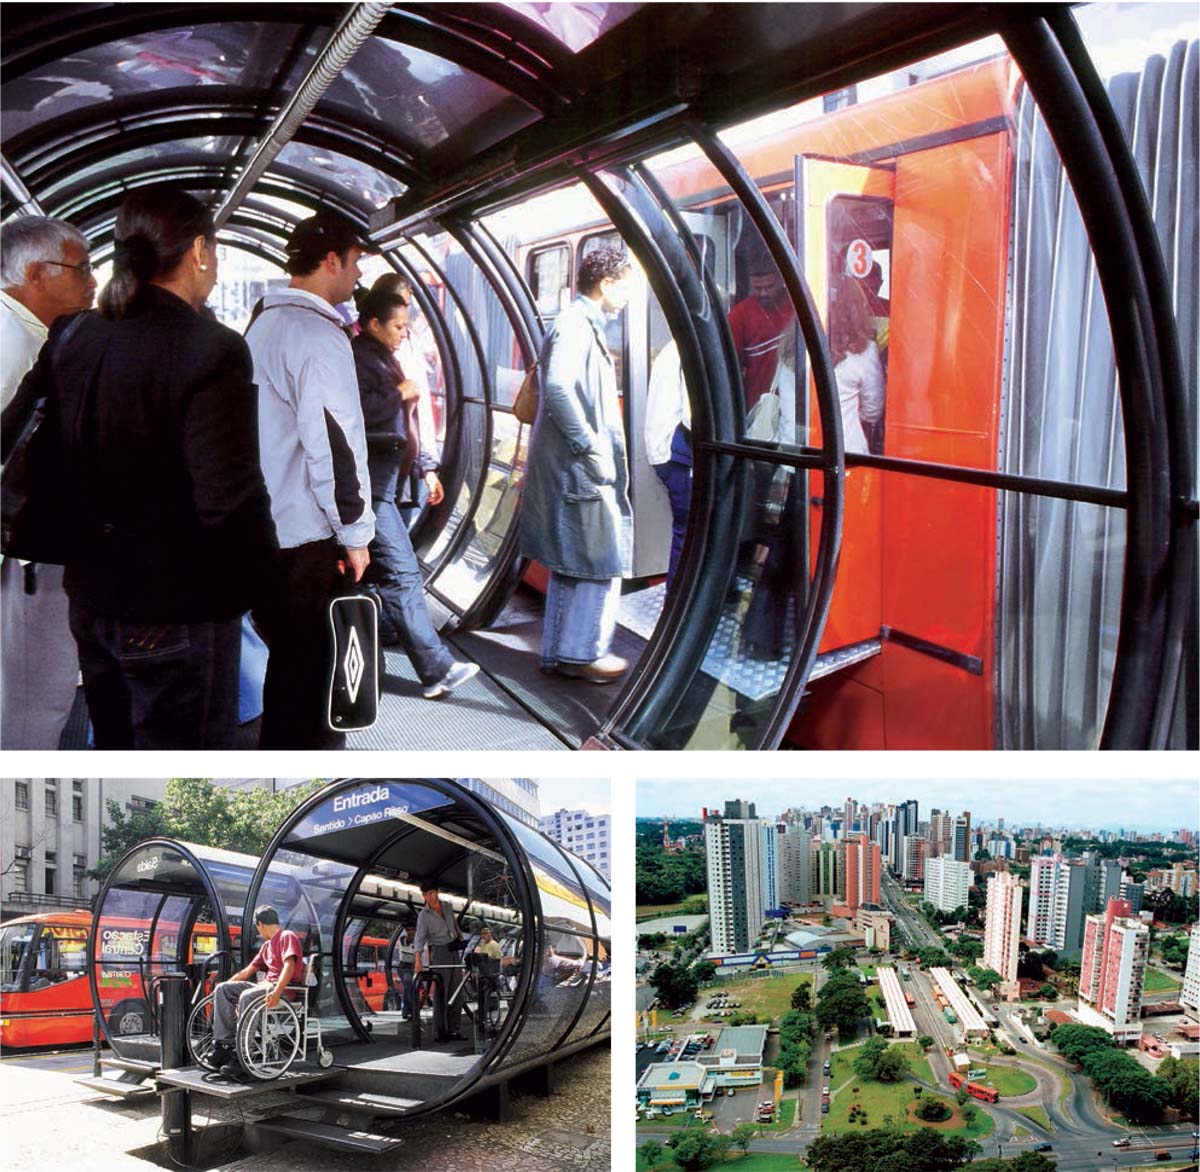 Building-Shared-Dreams-Tube-stations-BRT